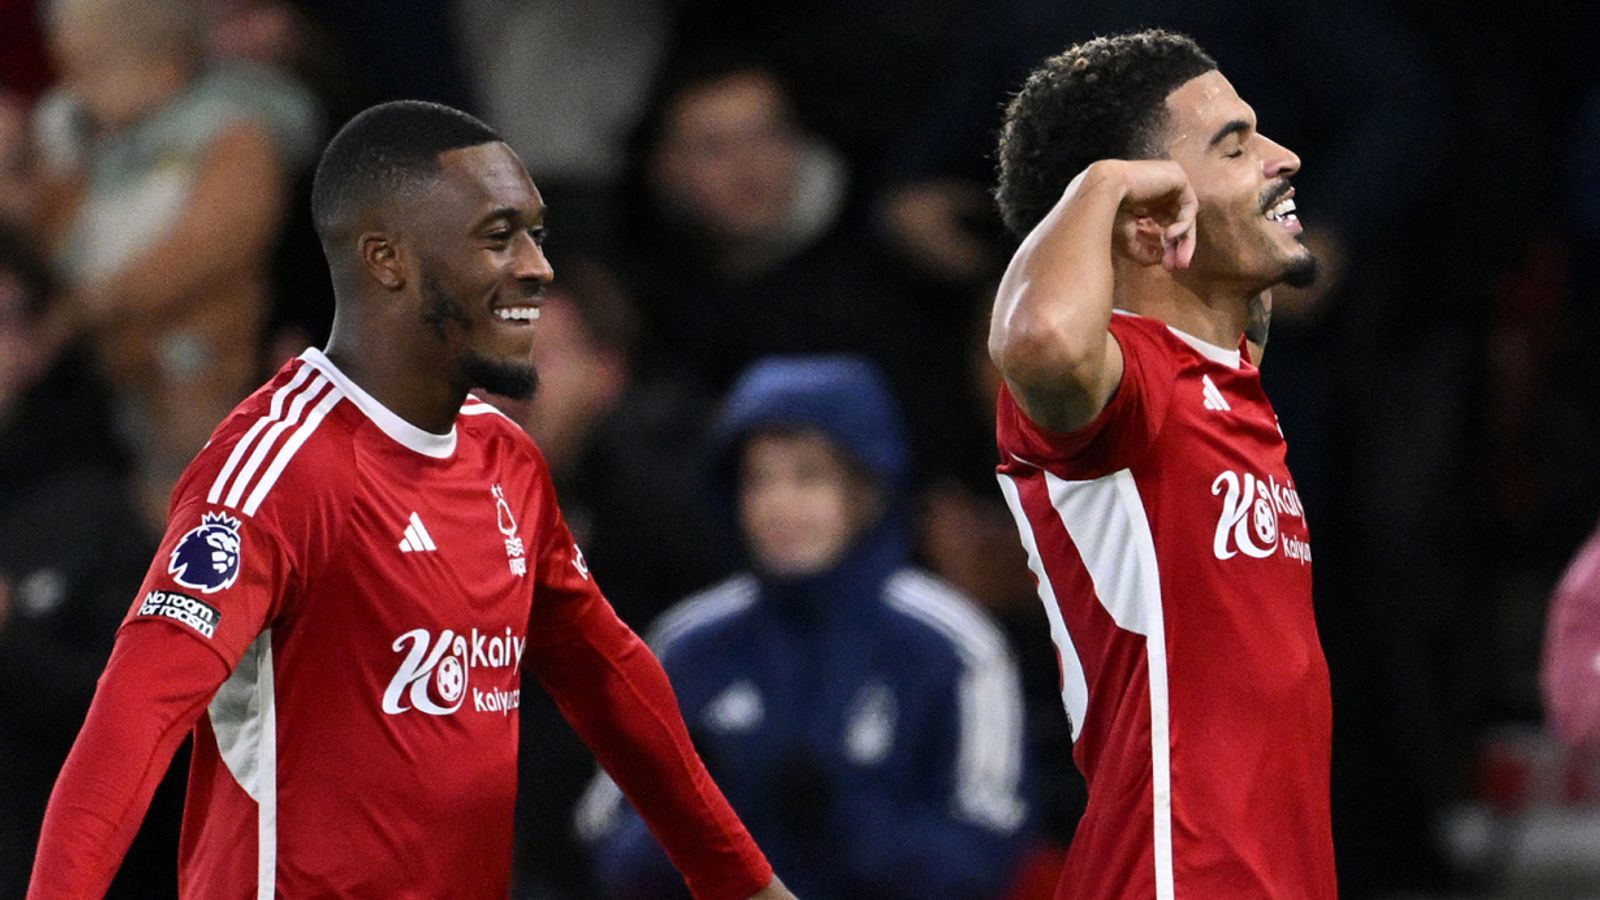 Gibbs-White seals late win as Forest bring Man Utd back down to earth